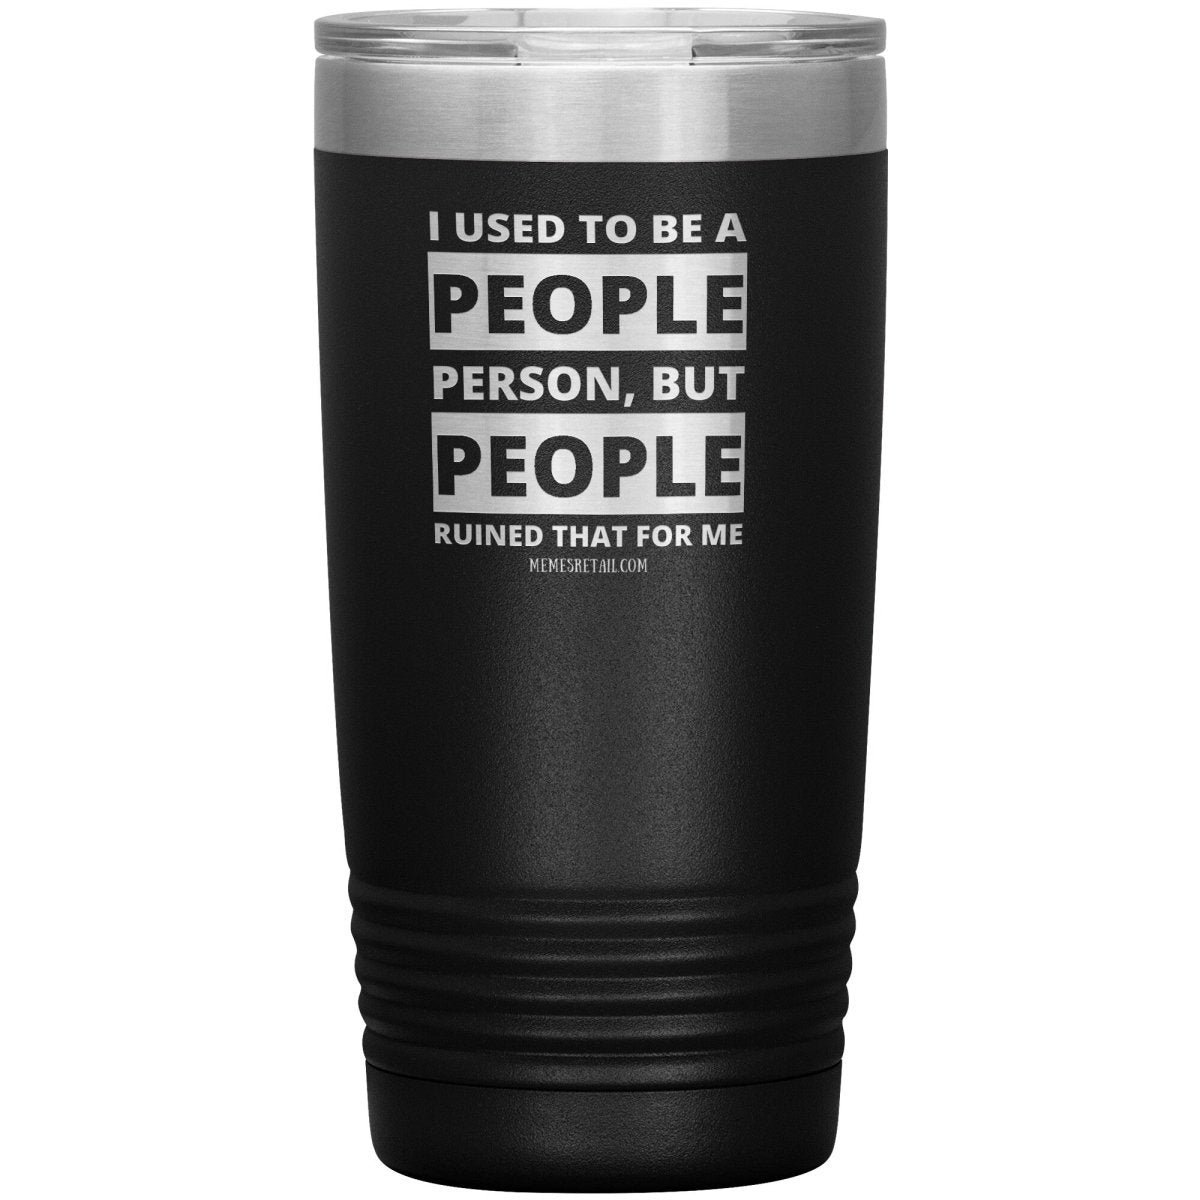 I Used To Be A People Person, But People Ruined That For Me Tumblers, 20oz Insulated Tumbler / Black - MemesRetail.com